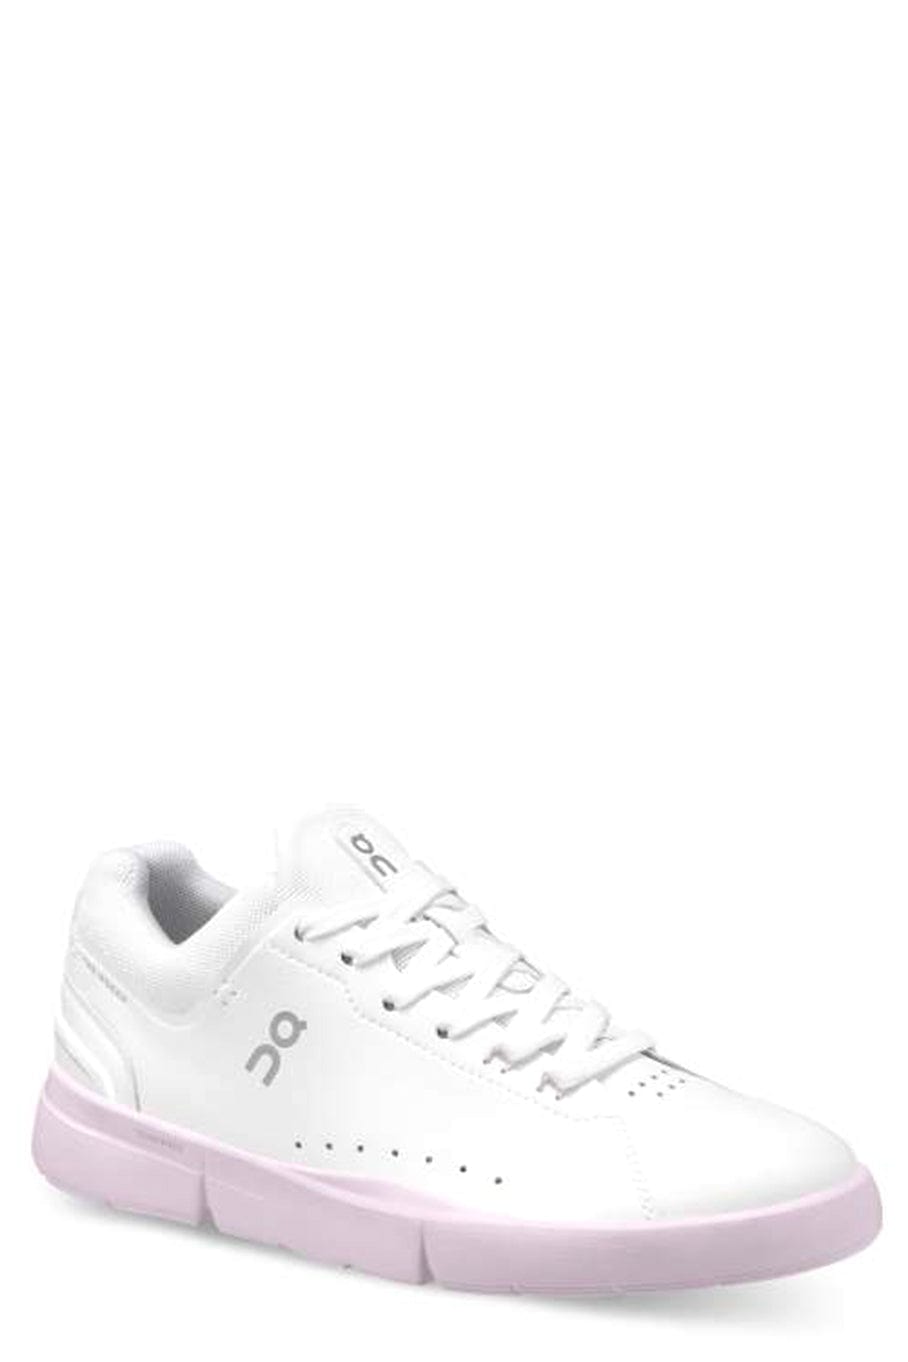 ON RUNNING-The Roger Advantage Sneaker - White Lily-